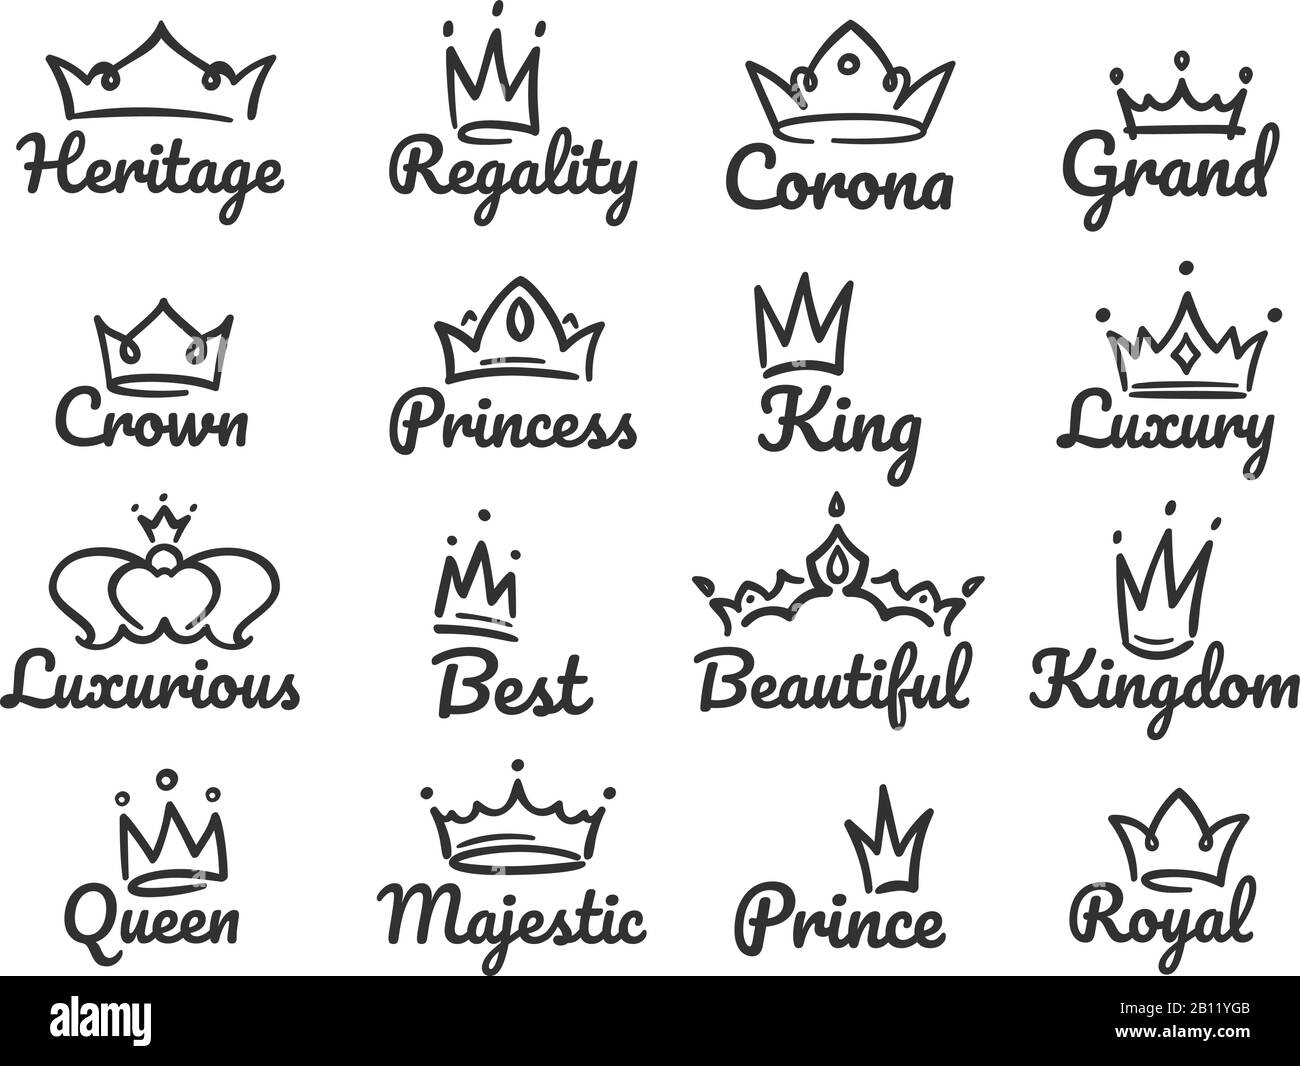 Majestic crown logo. Sketch prince and princess, hand drawn queen sign or king crowns graffiti vector illustration set Stock Vector